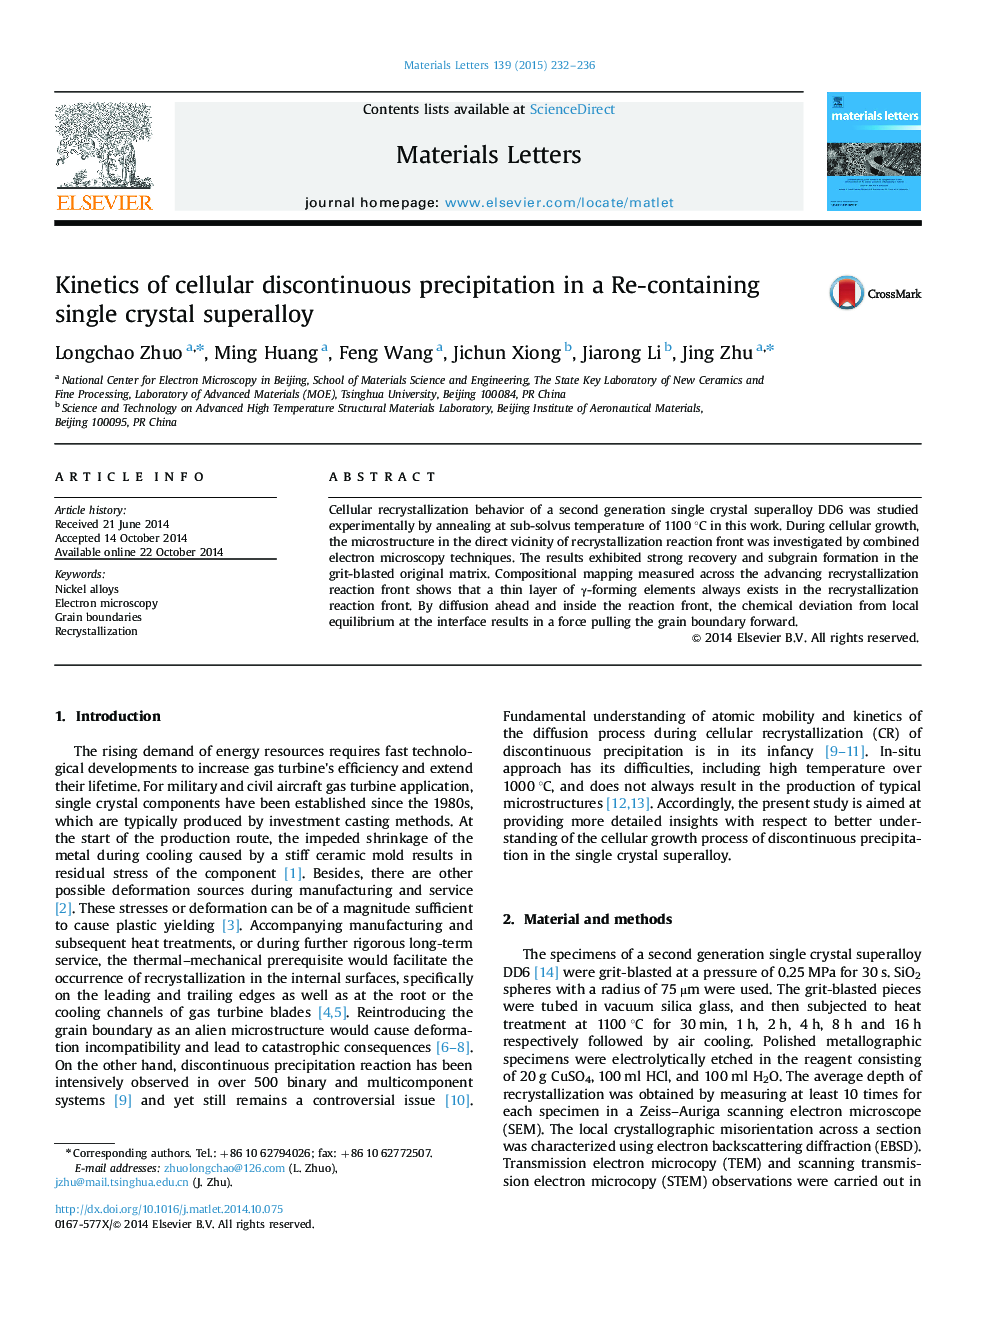 Kinetics of cellular discontinuous precipitation in a Re-containing single crystal superalloy